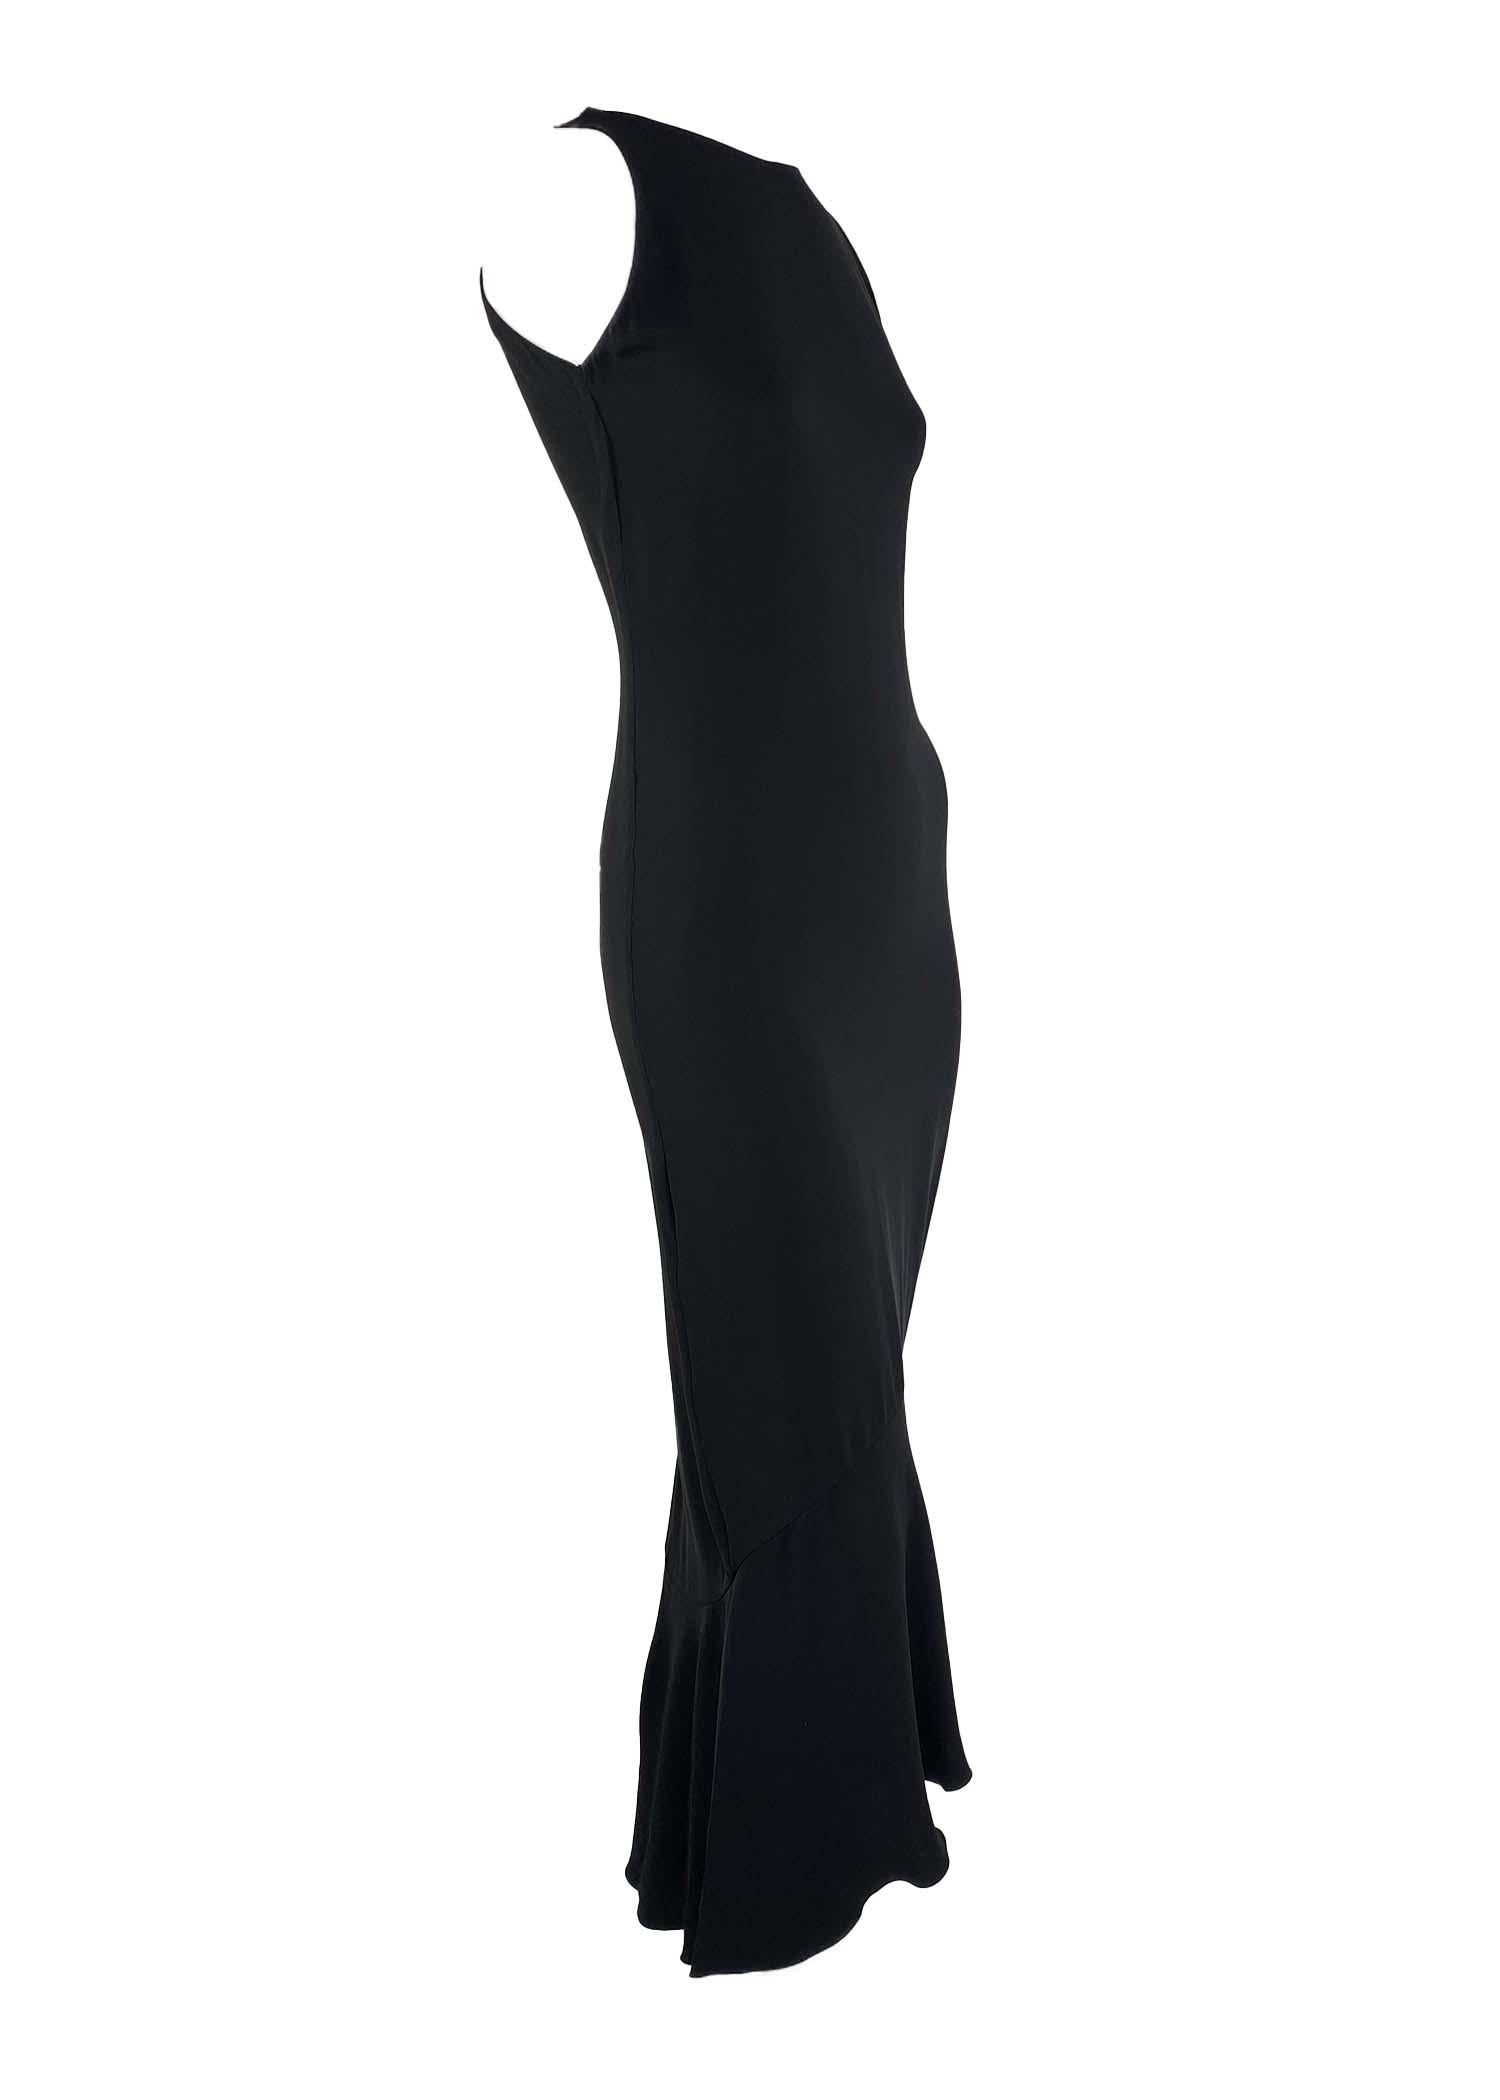 Women's Mid-Late 1990s Gianni Versace Couture Black Dropped Hem Bias-Cut Wiggle Gown LBD For Sale